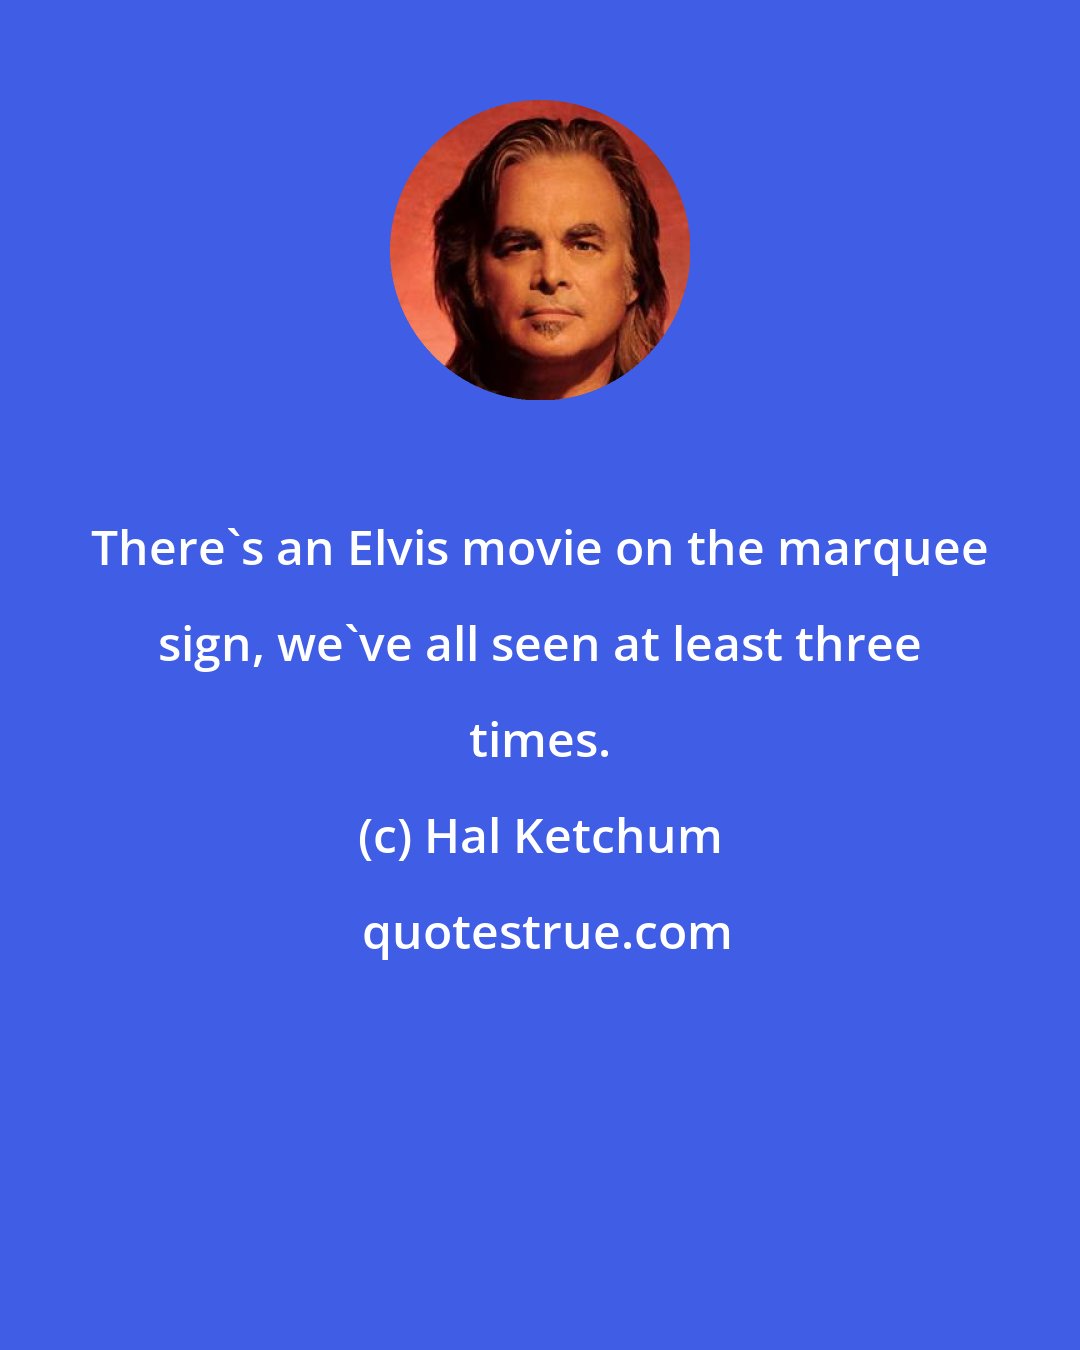 Hal Ketchum: There's an Elvis movie on the marquee sign, we've all seen at least three times.